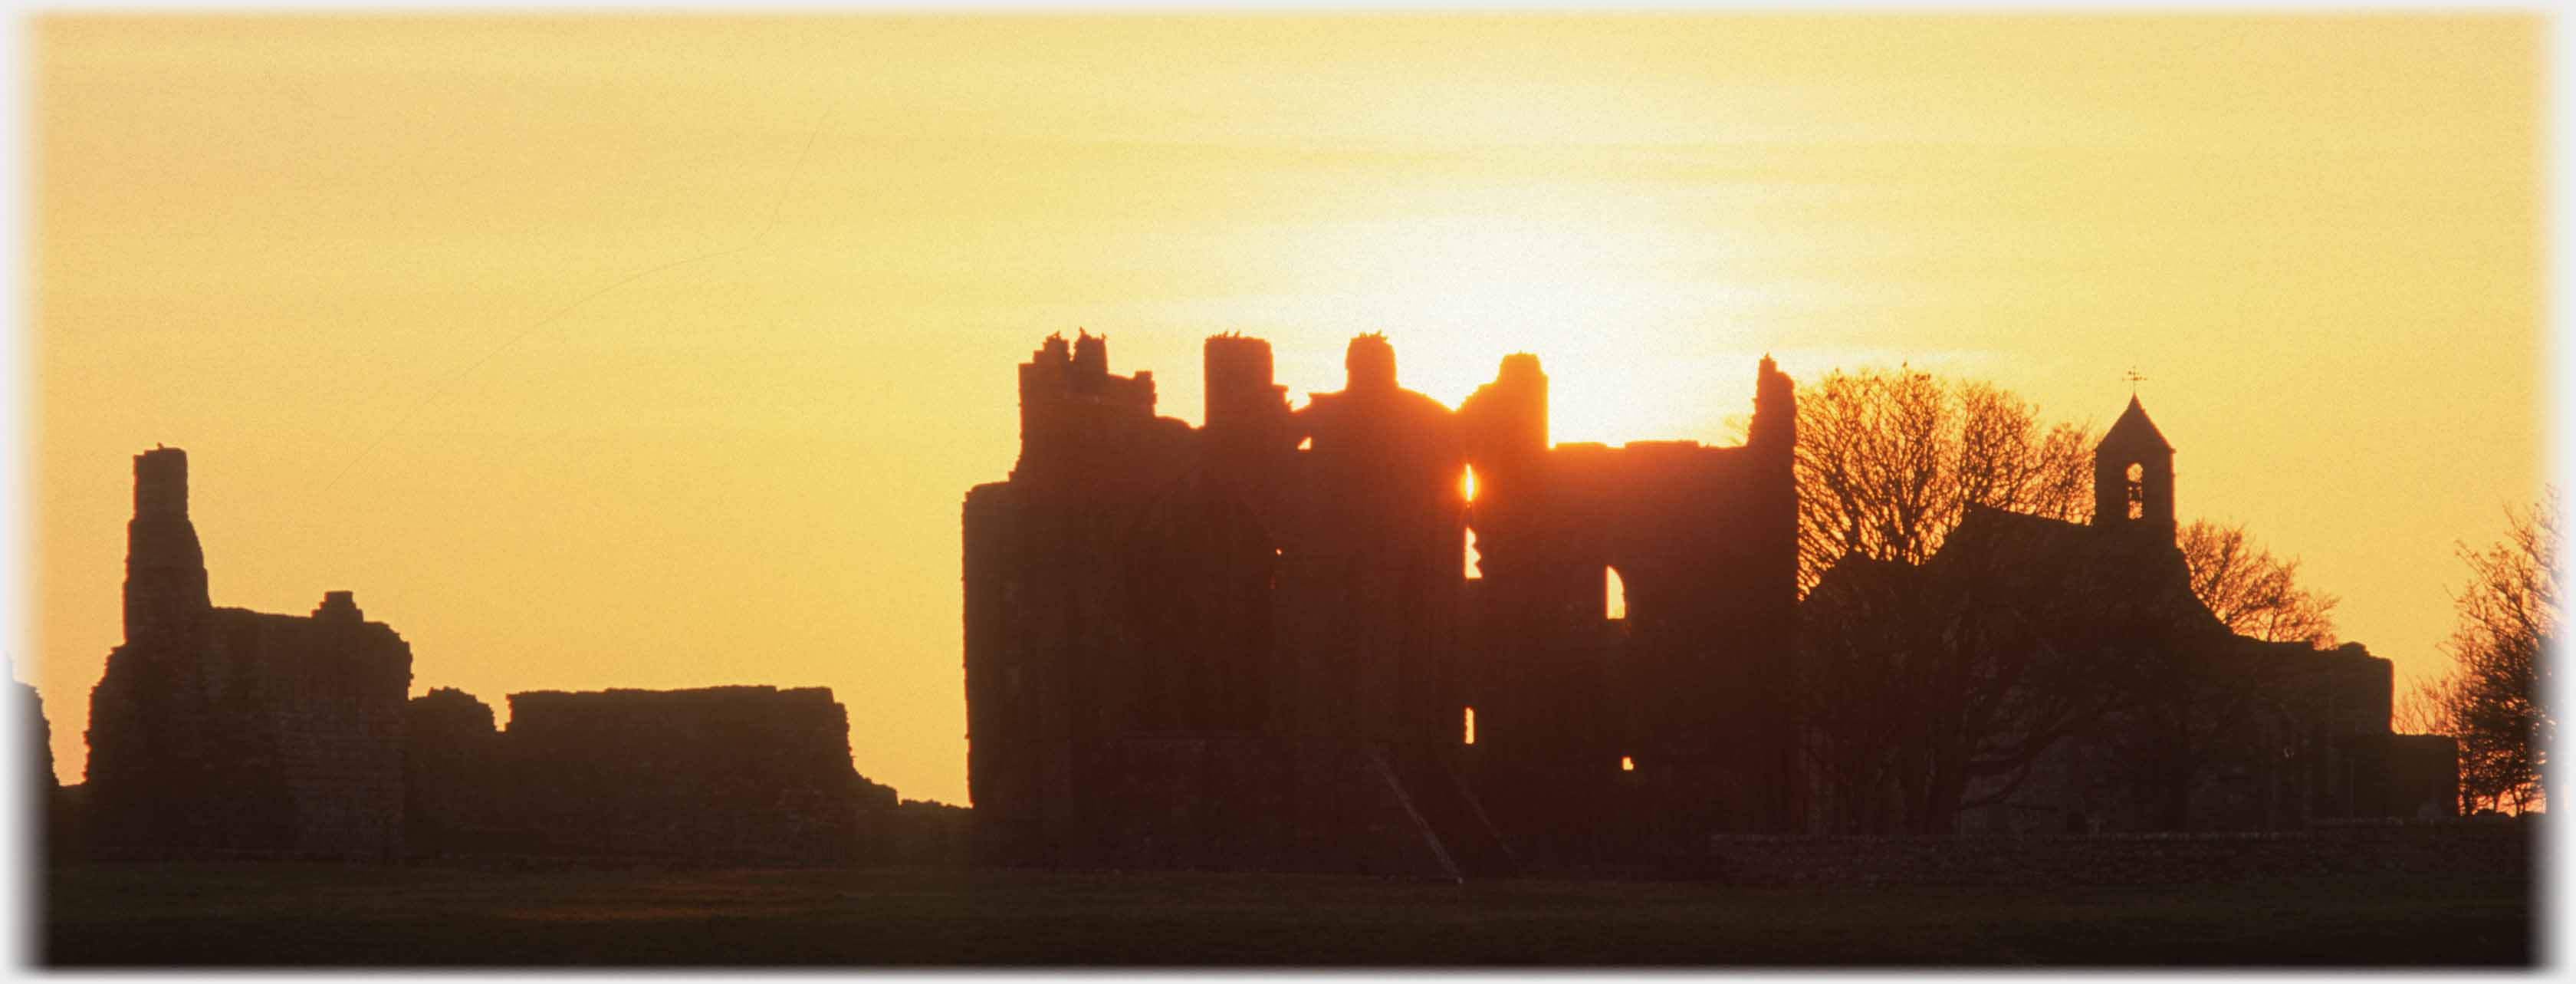 Silhouette of ruined building with strong sun behind.